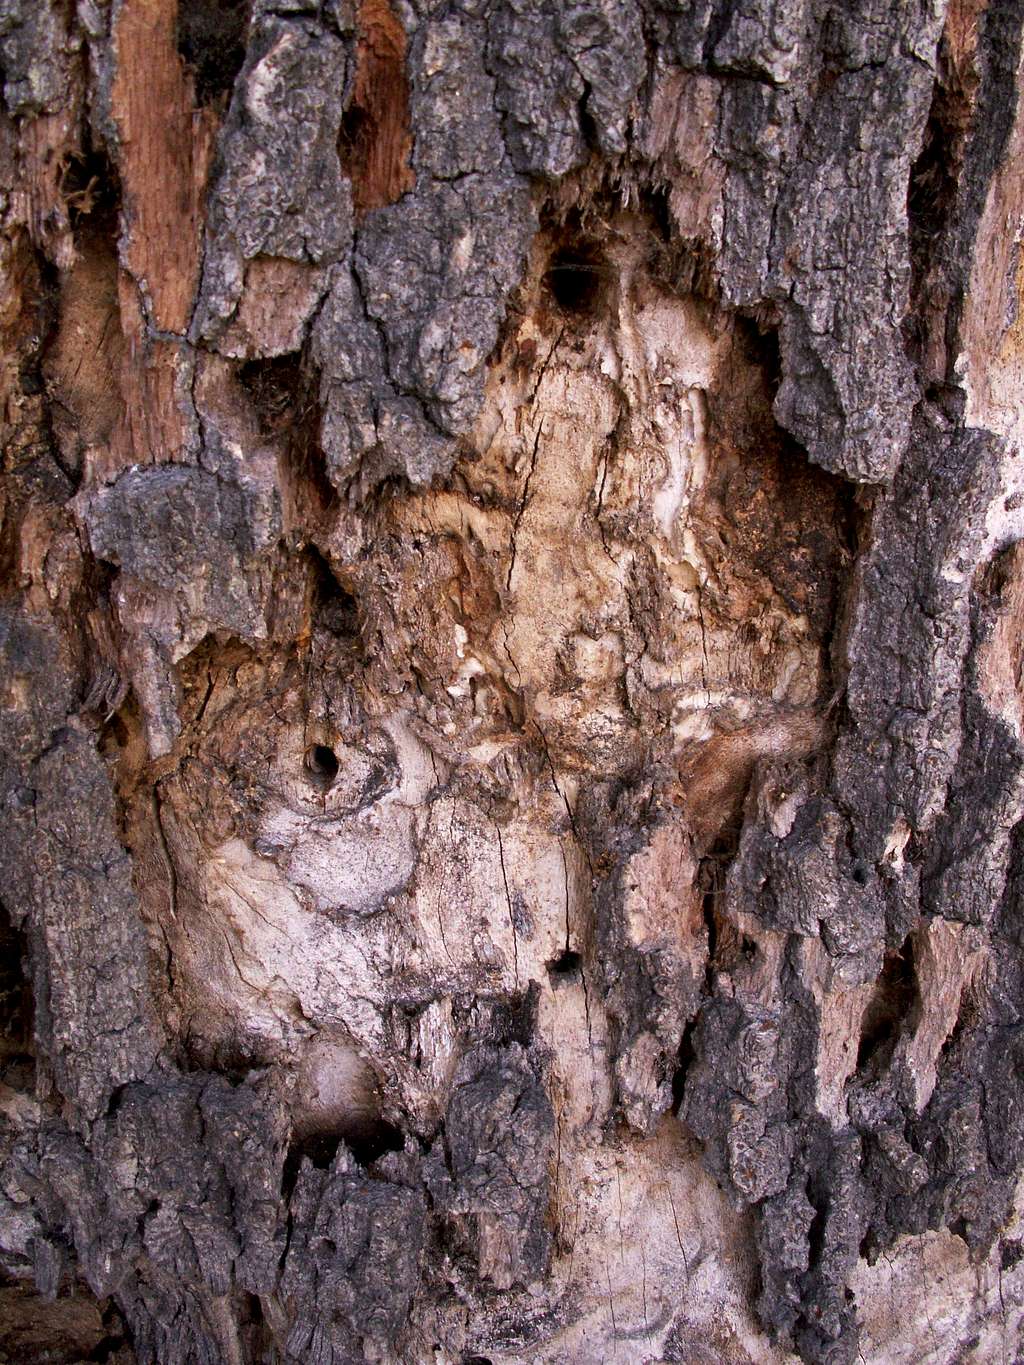 The bark and wood ...